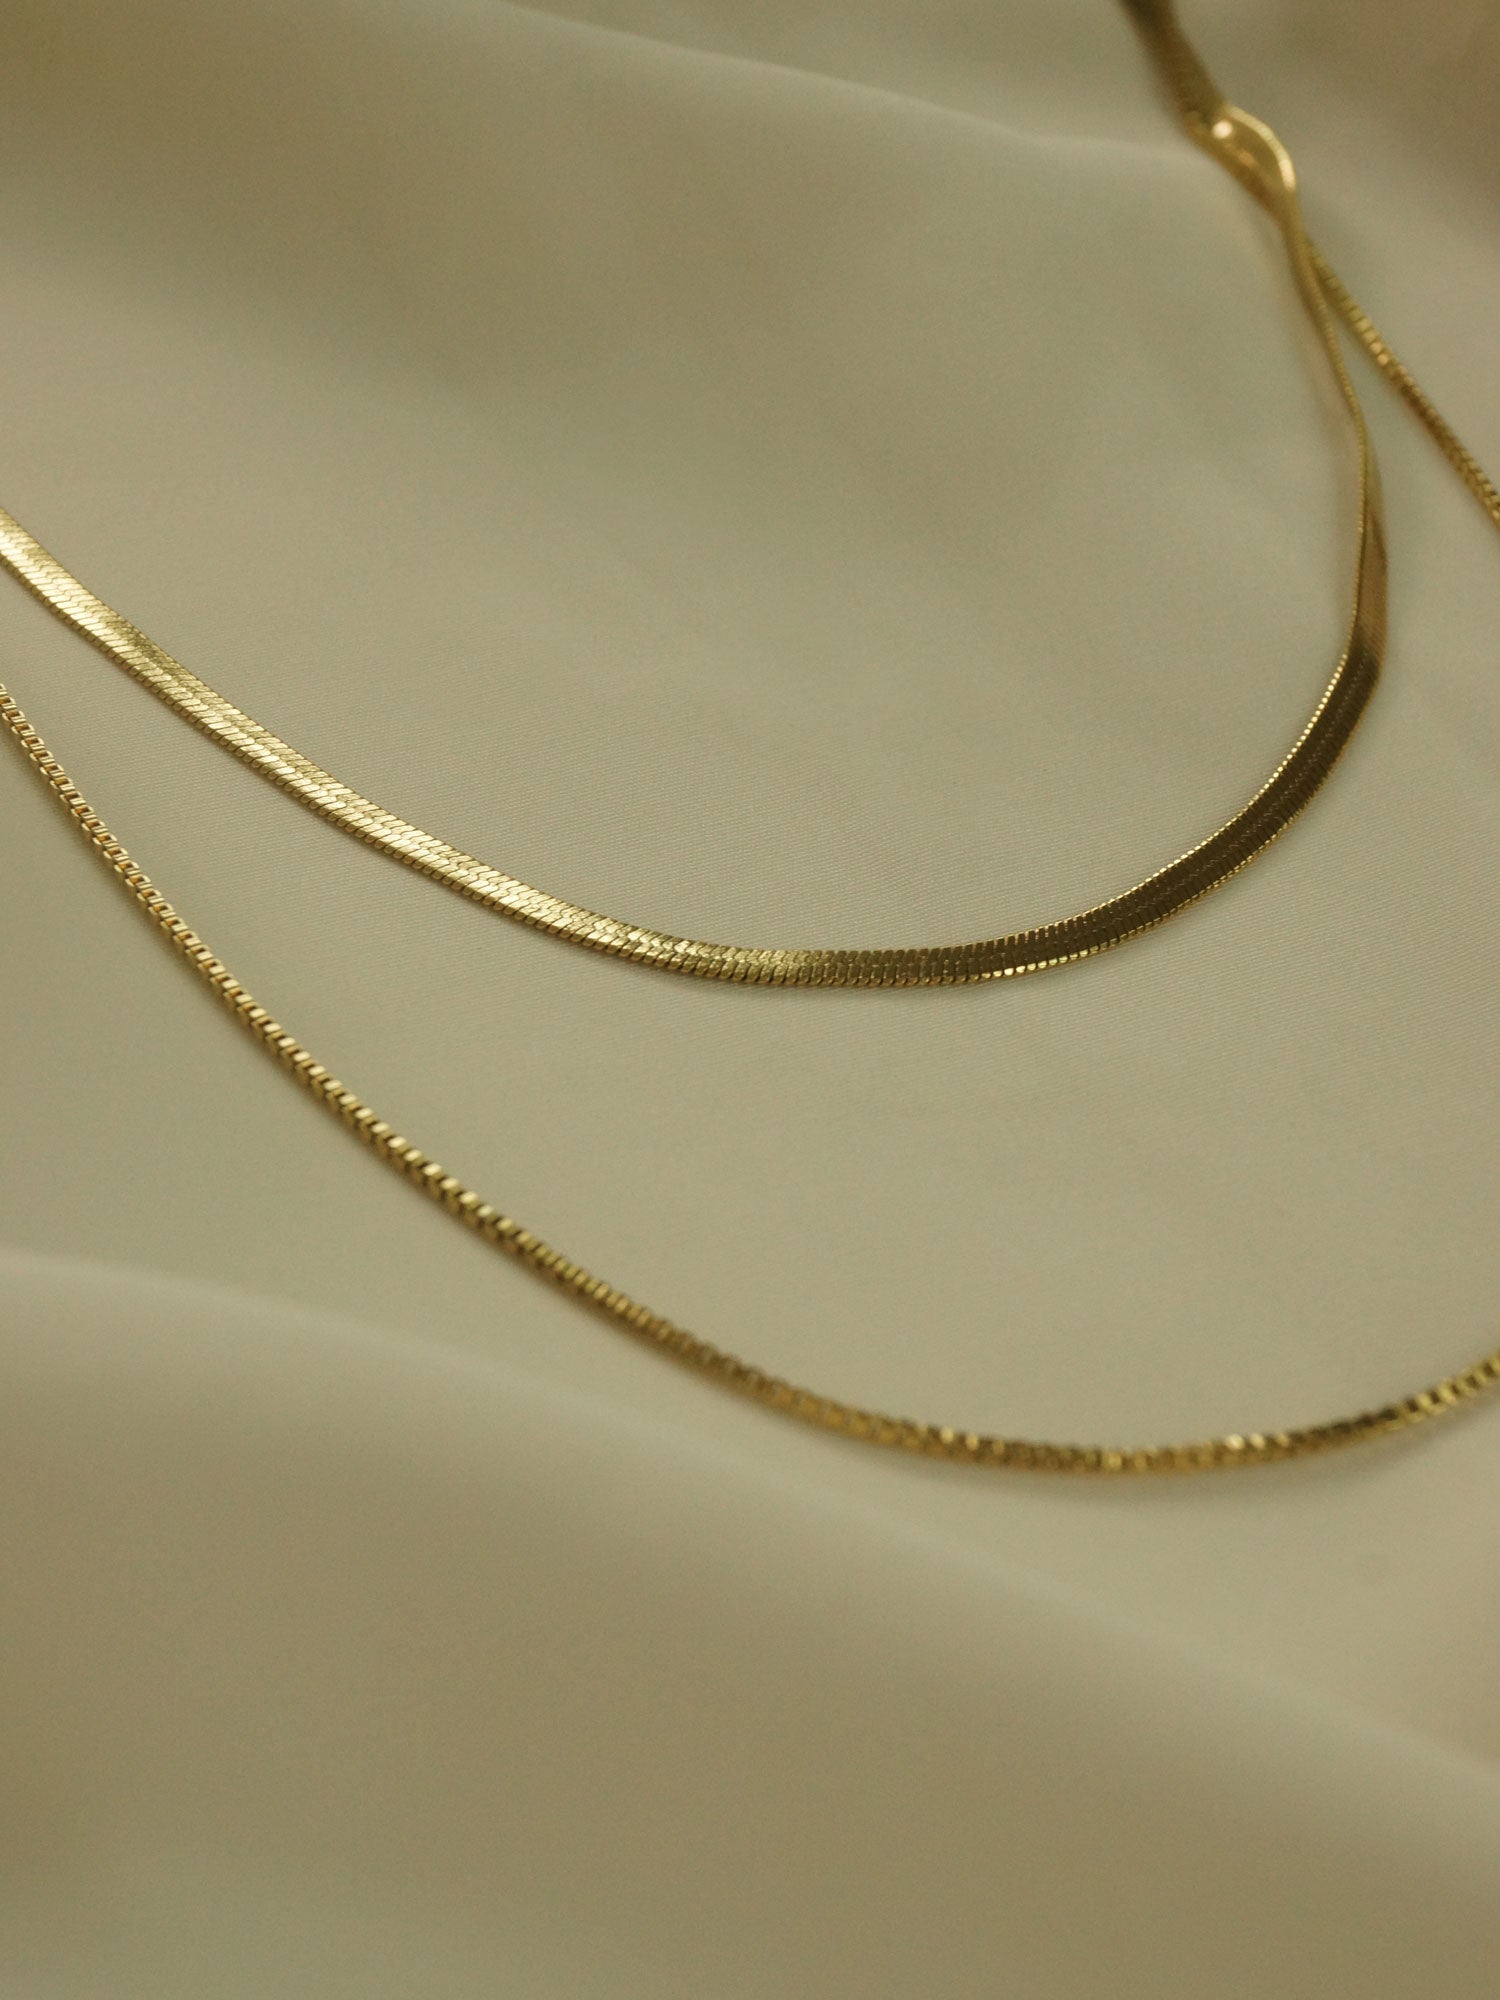 Layered Snake Chain Necklace *18K Gold-plated Stainless Steel